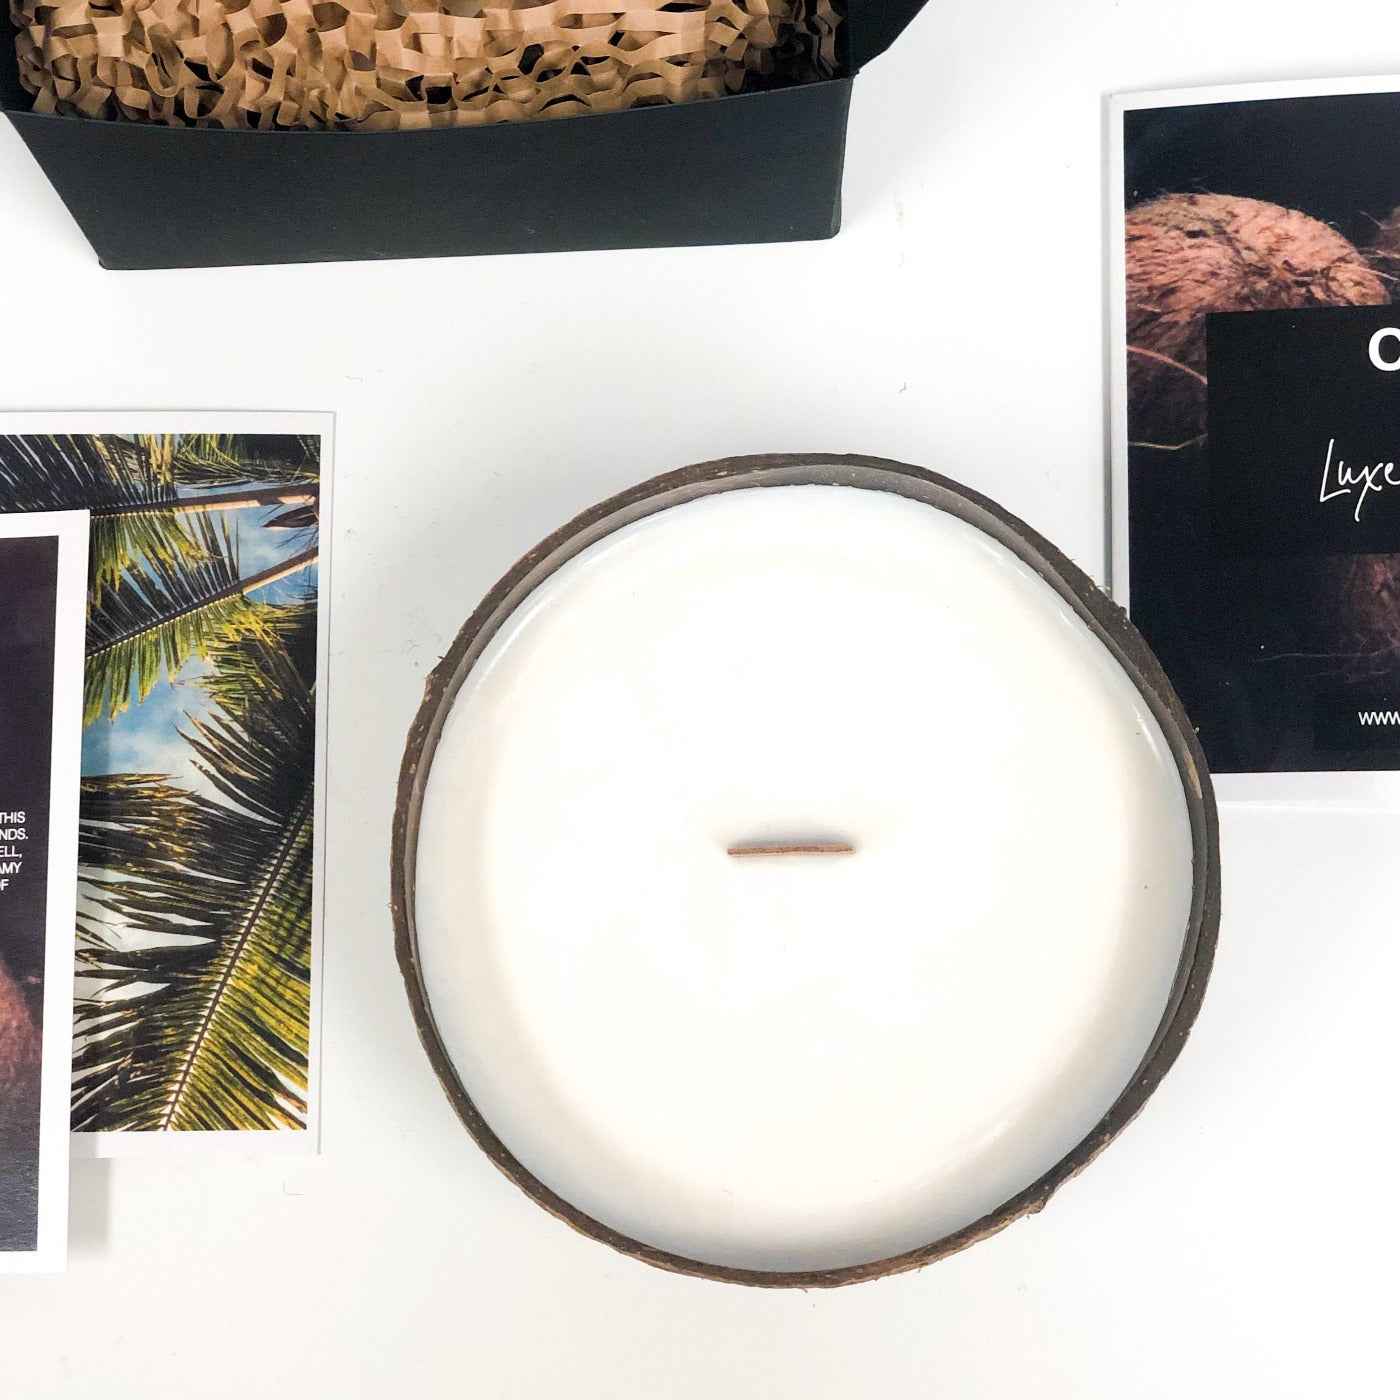 Tulum Coconut bowl candles by The Luxe Candle Co